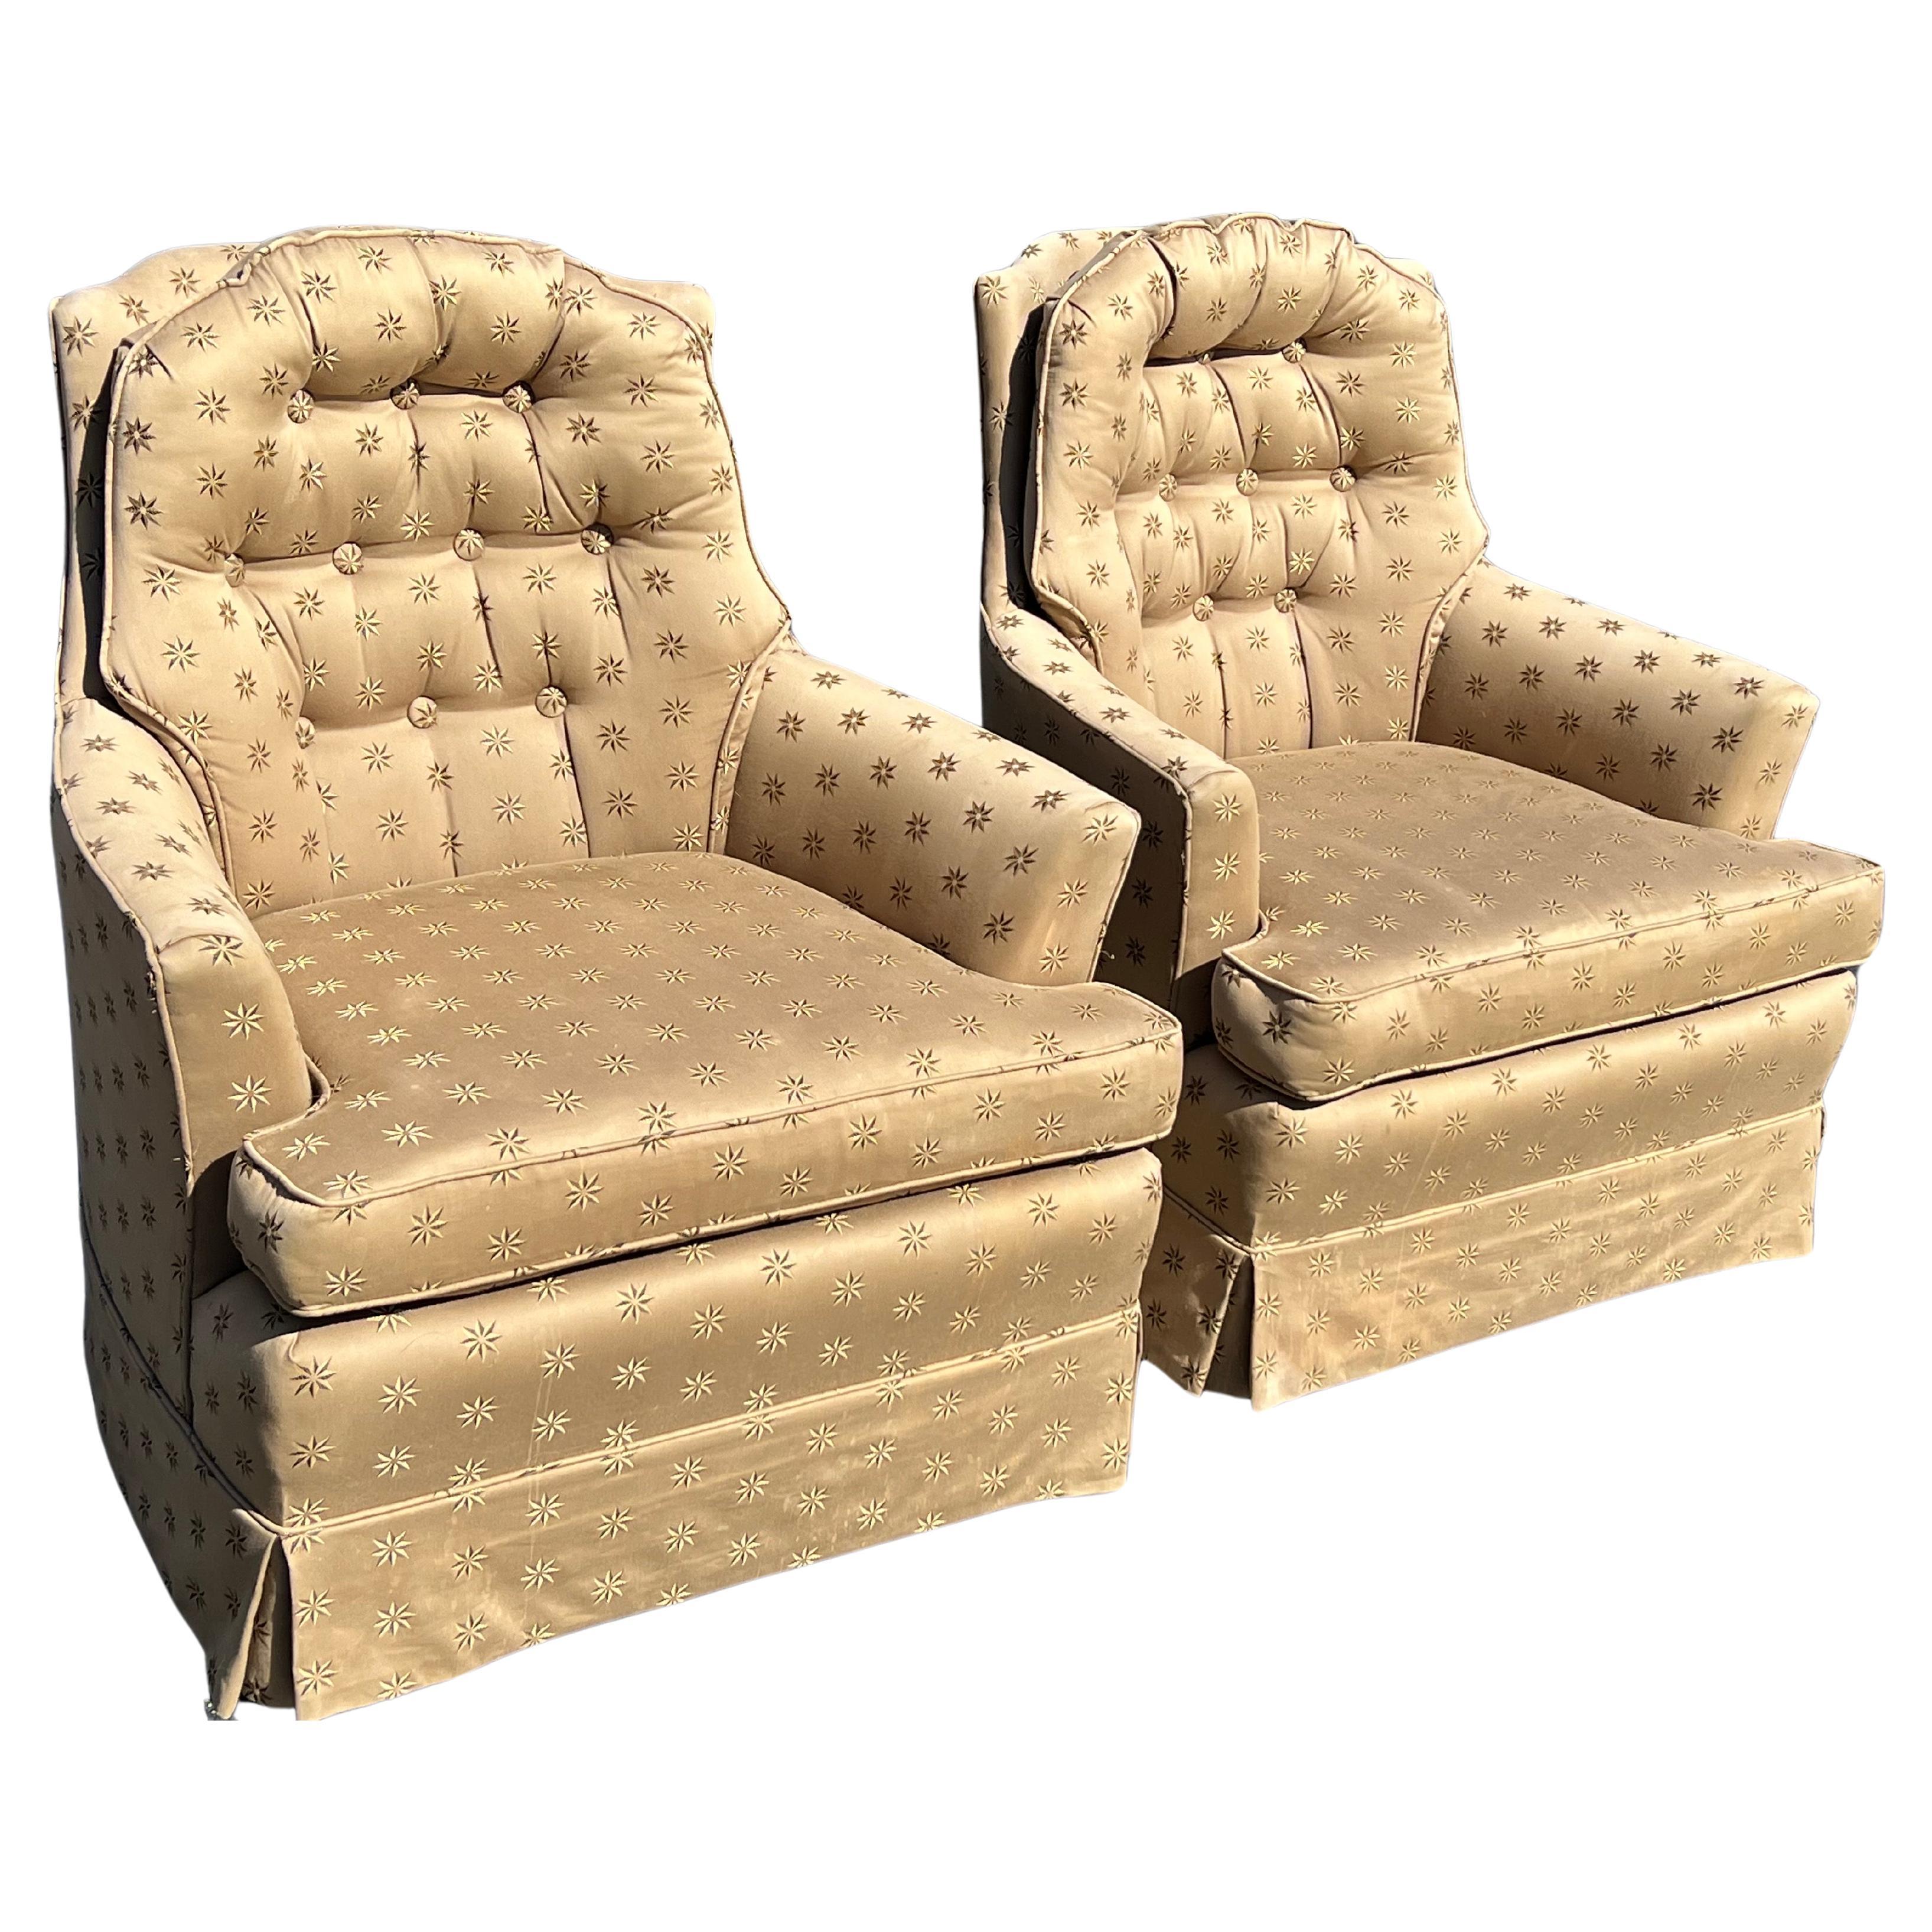 Pair of Upholstered Arm Chairs  For Sale